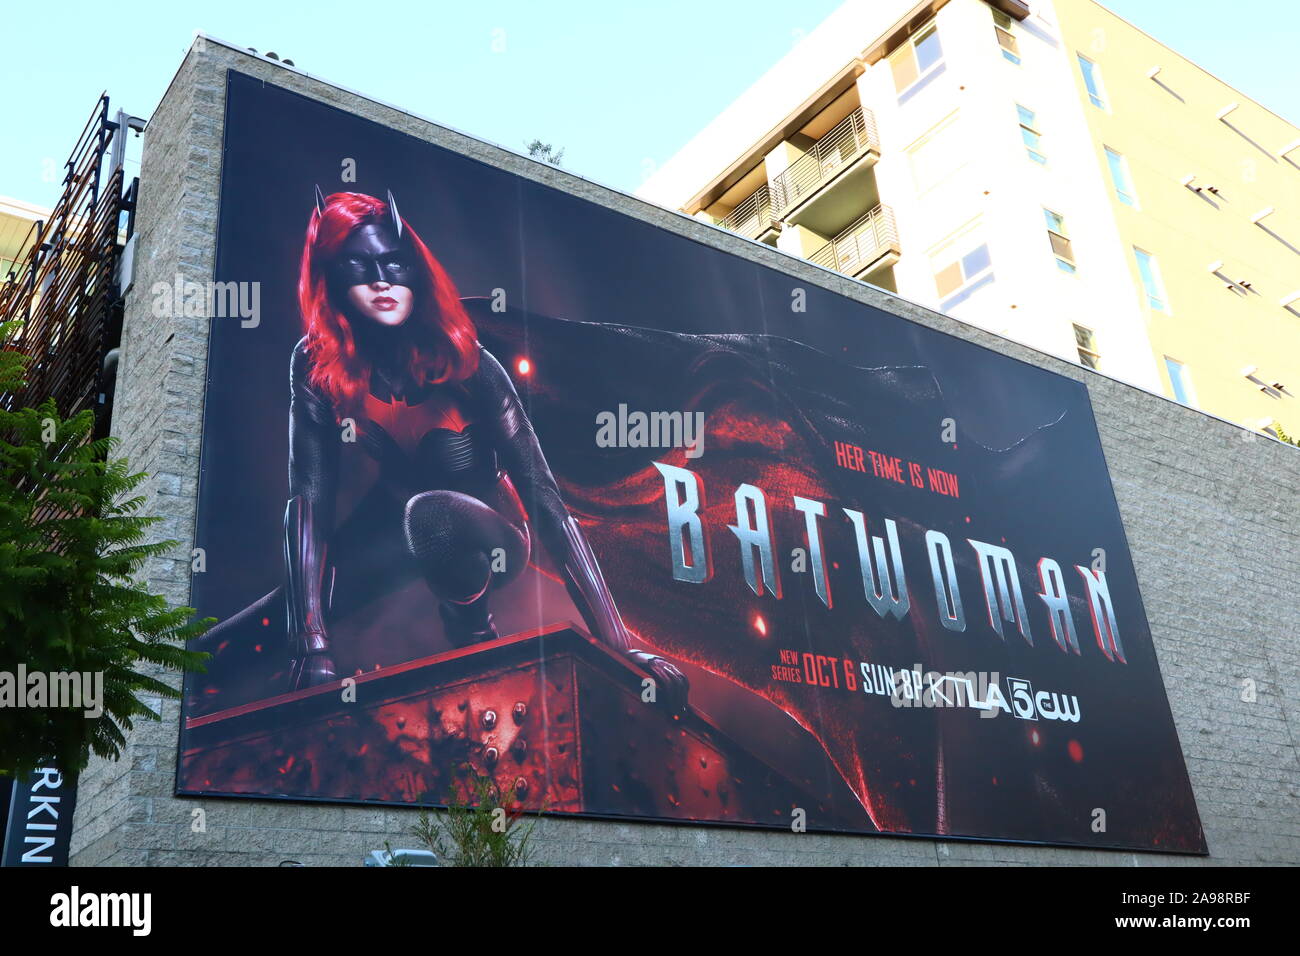 Hollywood, California - Billboard of BATWOMAN located on Vine Street, Hollywood. Batwoman is an American superhero television series Stock Photo